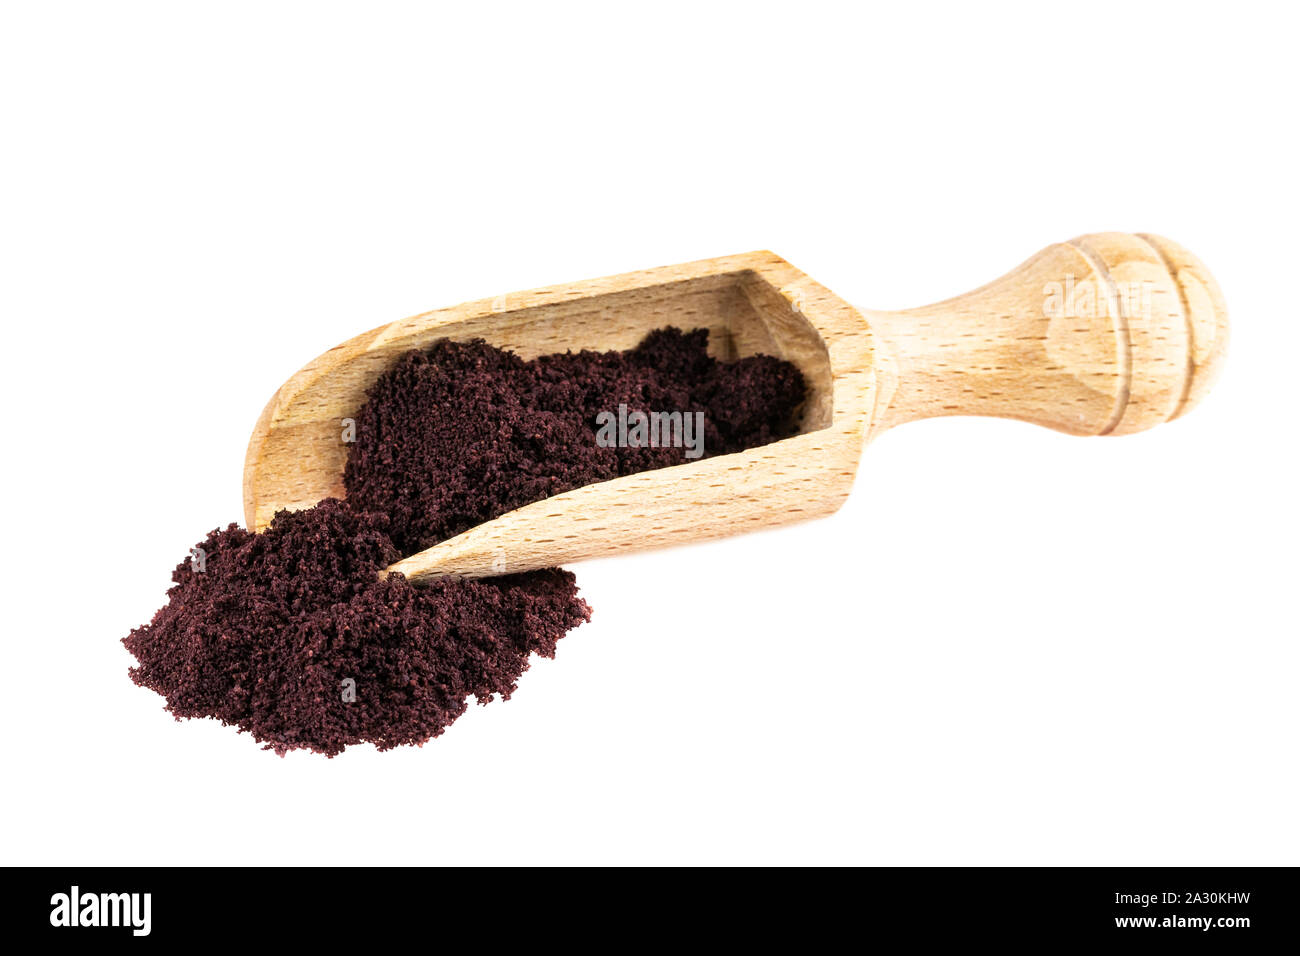 Acai powder. Acai palm fruit berry powder in wooden scop isolated on white Stock Photo